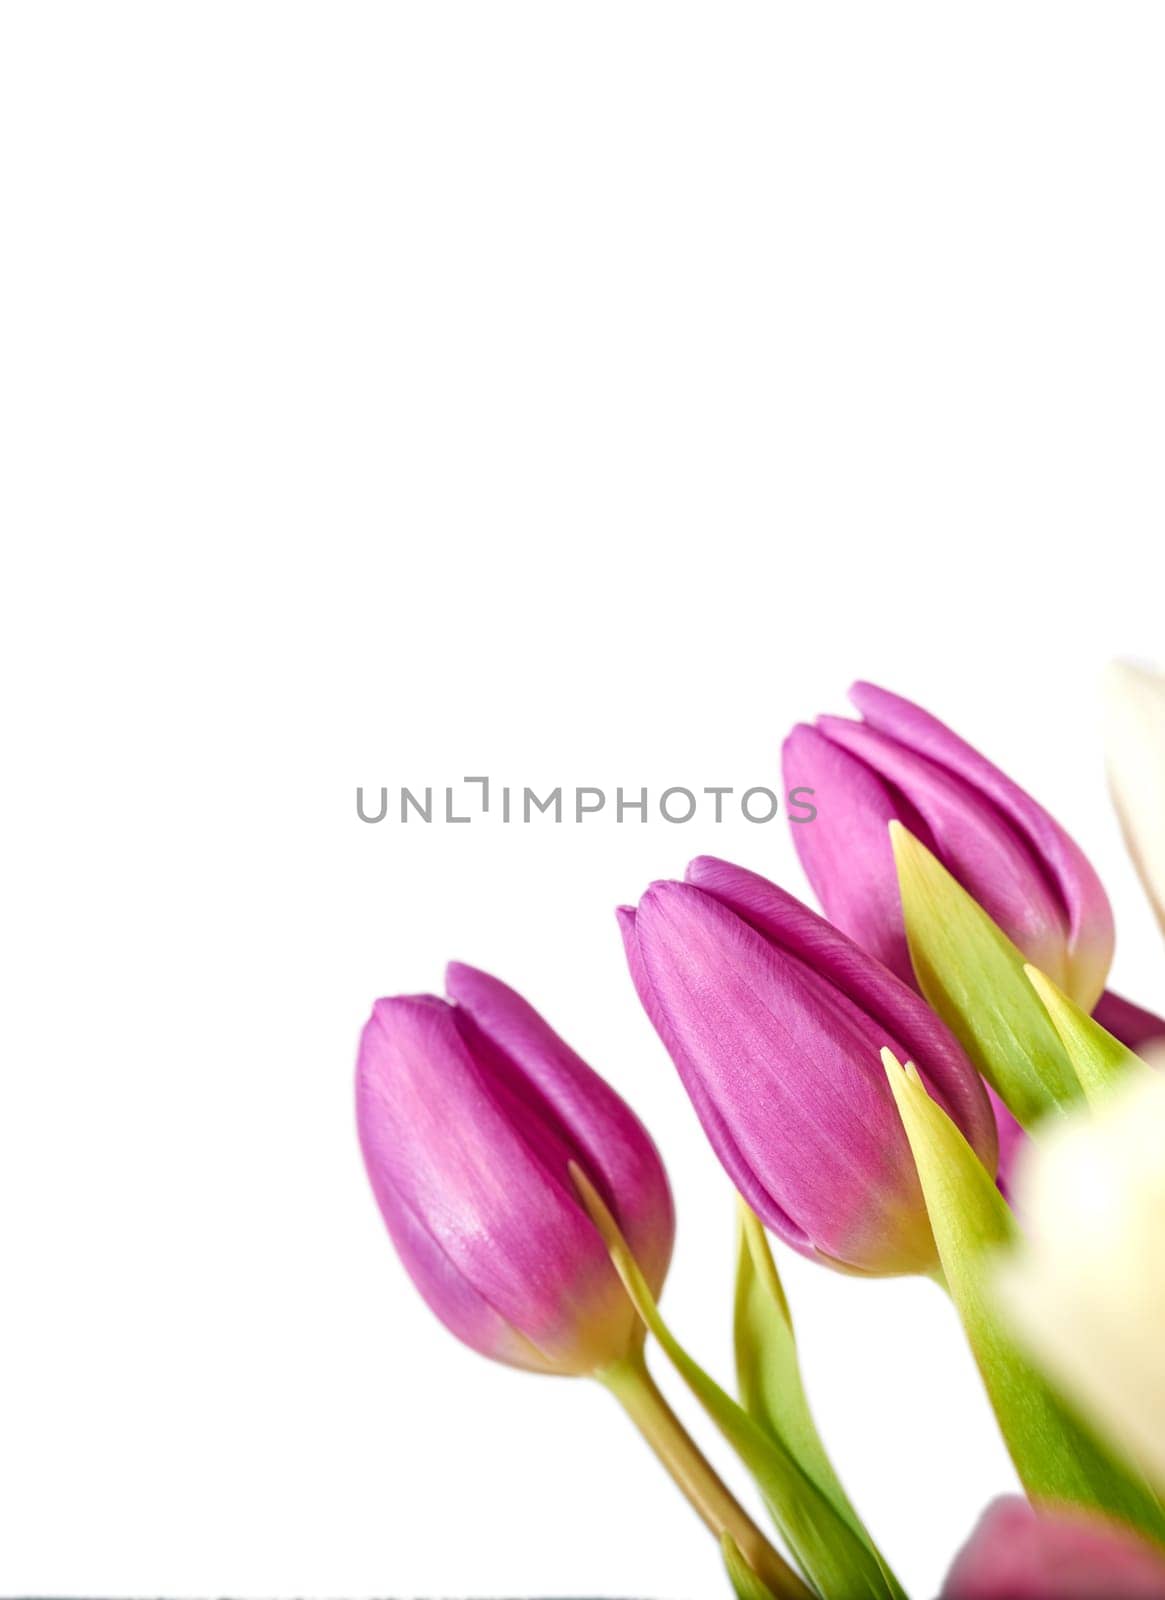 Flowers, tulips and pink in studio by white background, blossom and peace or floral with greenery. Plant, petal and mockup for decoration, creativity and wallpaper or screensaver with natural color by YuriArcurs